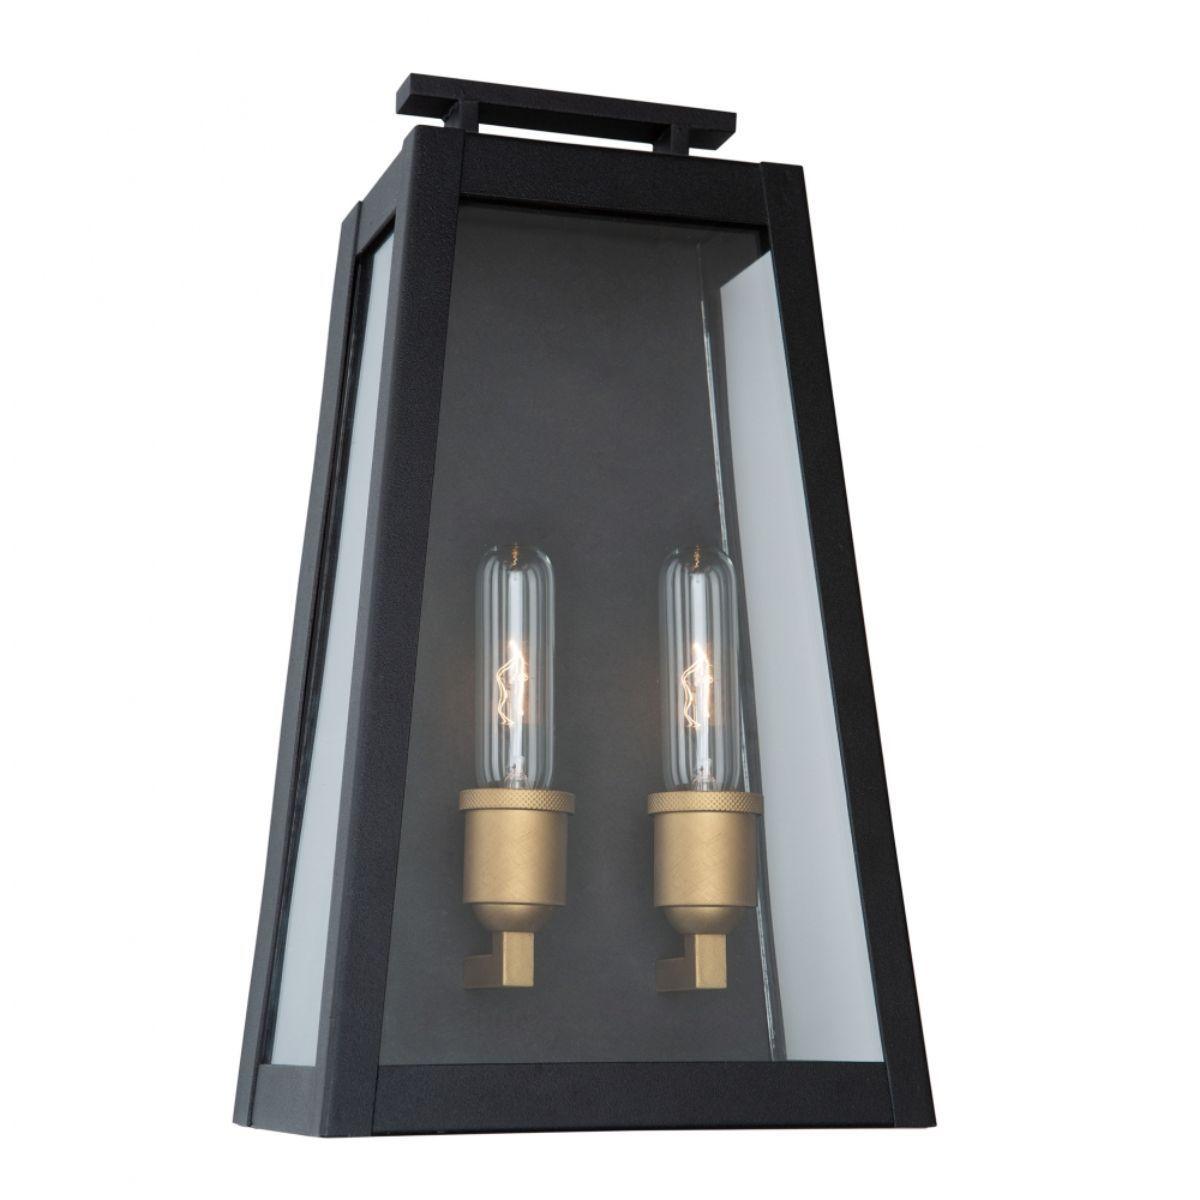 Charlestown 16 in. 2 Lights Outdoor Wall Sconce Black Finish